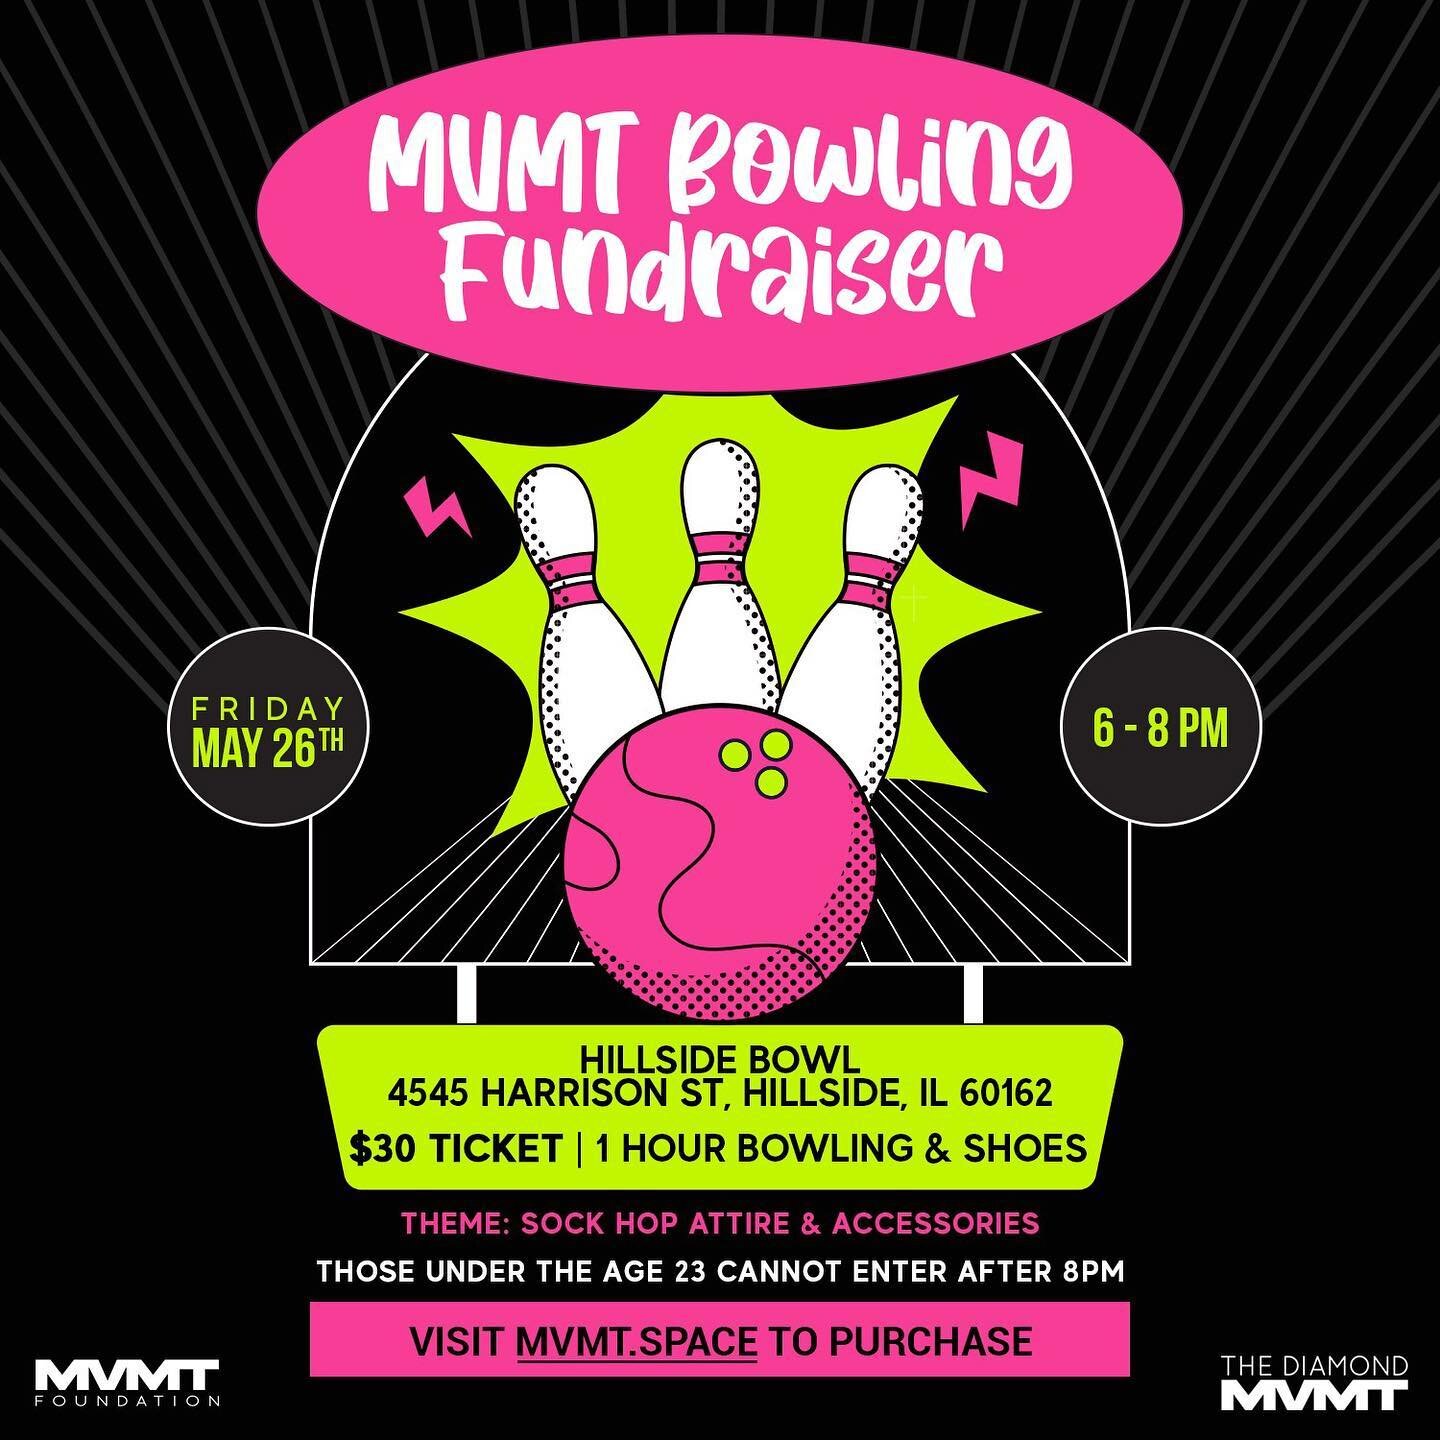 It&rsquo;s a party! 🎳 Join us next Friday for a fun family experience and help us further the mission of the MVMT! 💎Tickets available now at MVMT.Space. Tell errbody! 🗣️
⠀ 
#ChicagoNonprofit #ChicagoEvents